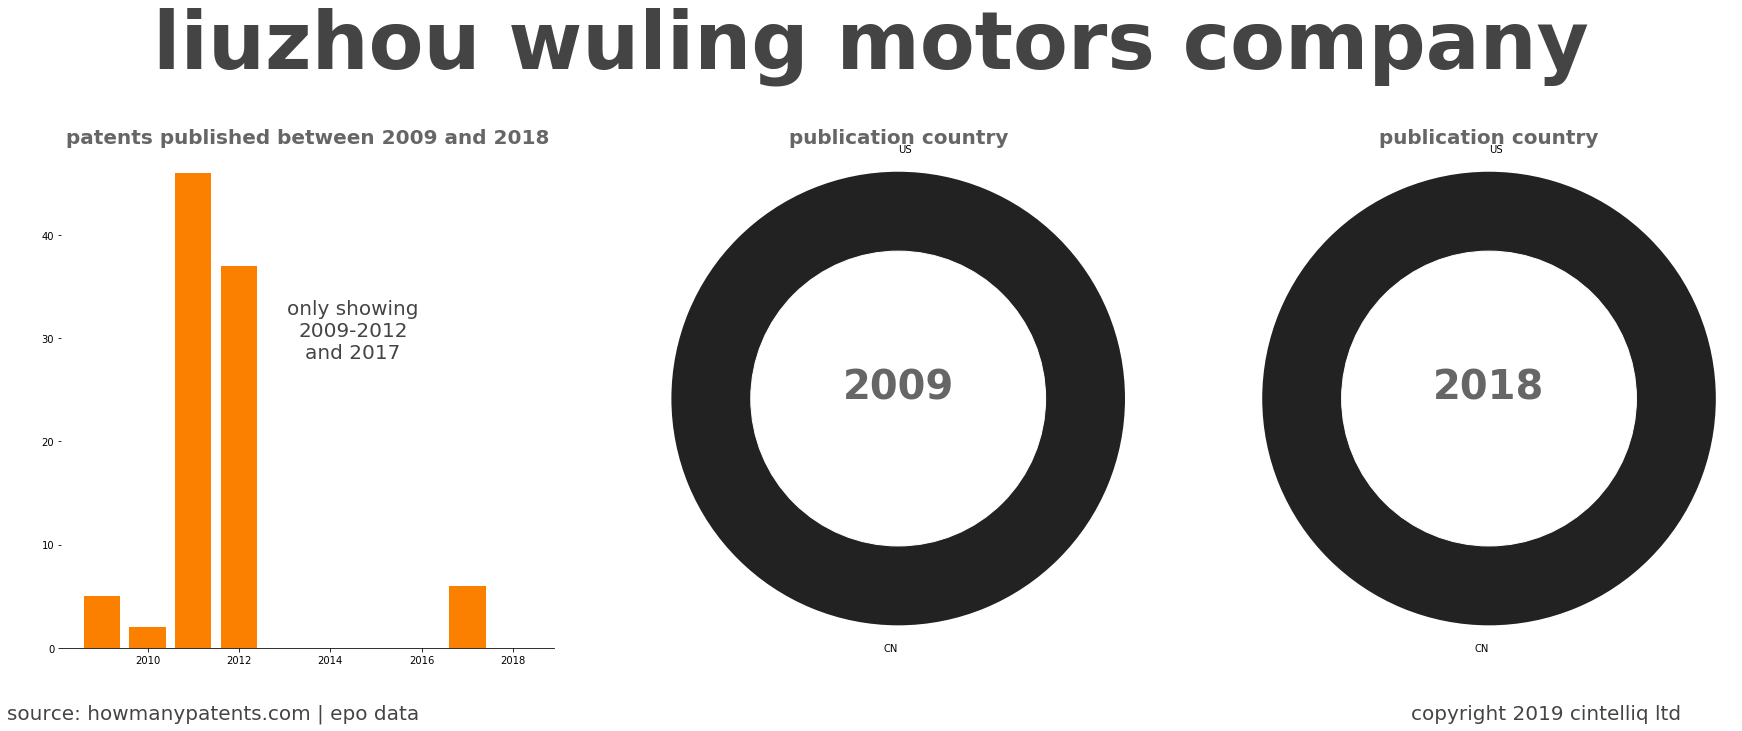 summary of patents for Liuzhou Wuling Motors Company